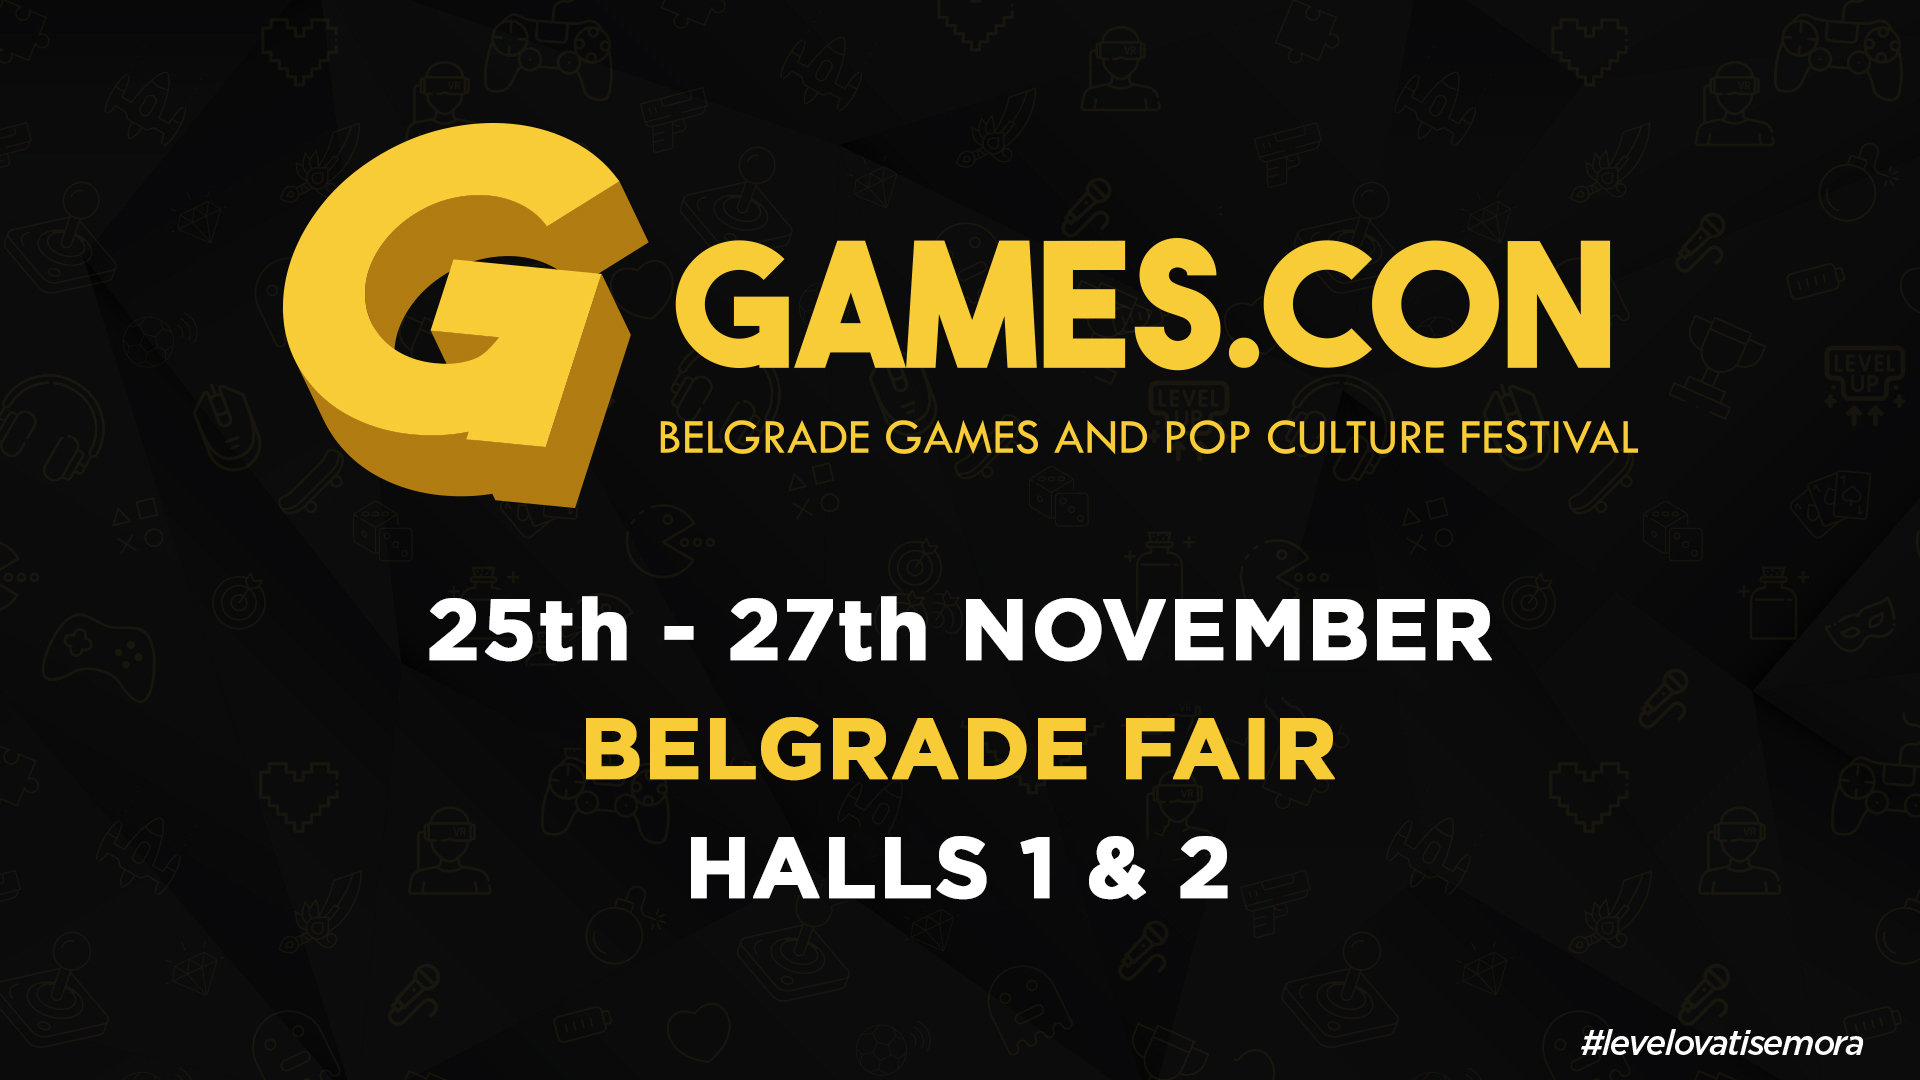 GAMES.CON, the largest and the most popular gaming and pop culture festival in the region starts on the 25th of November!